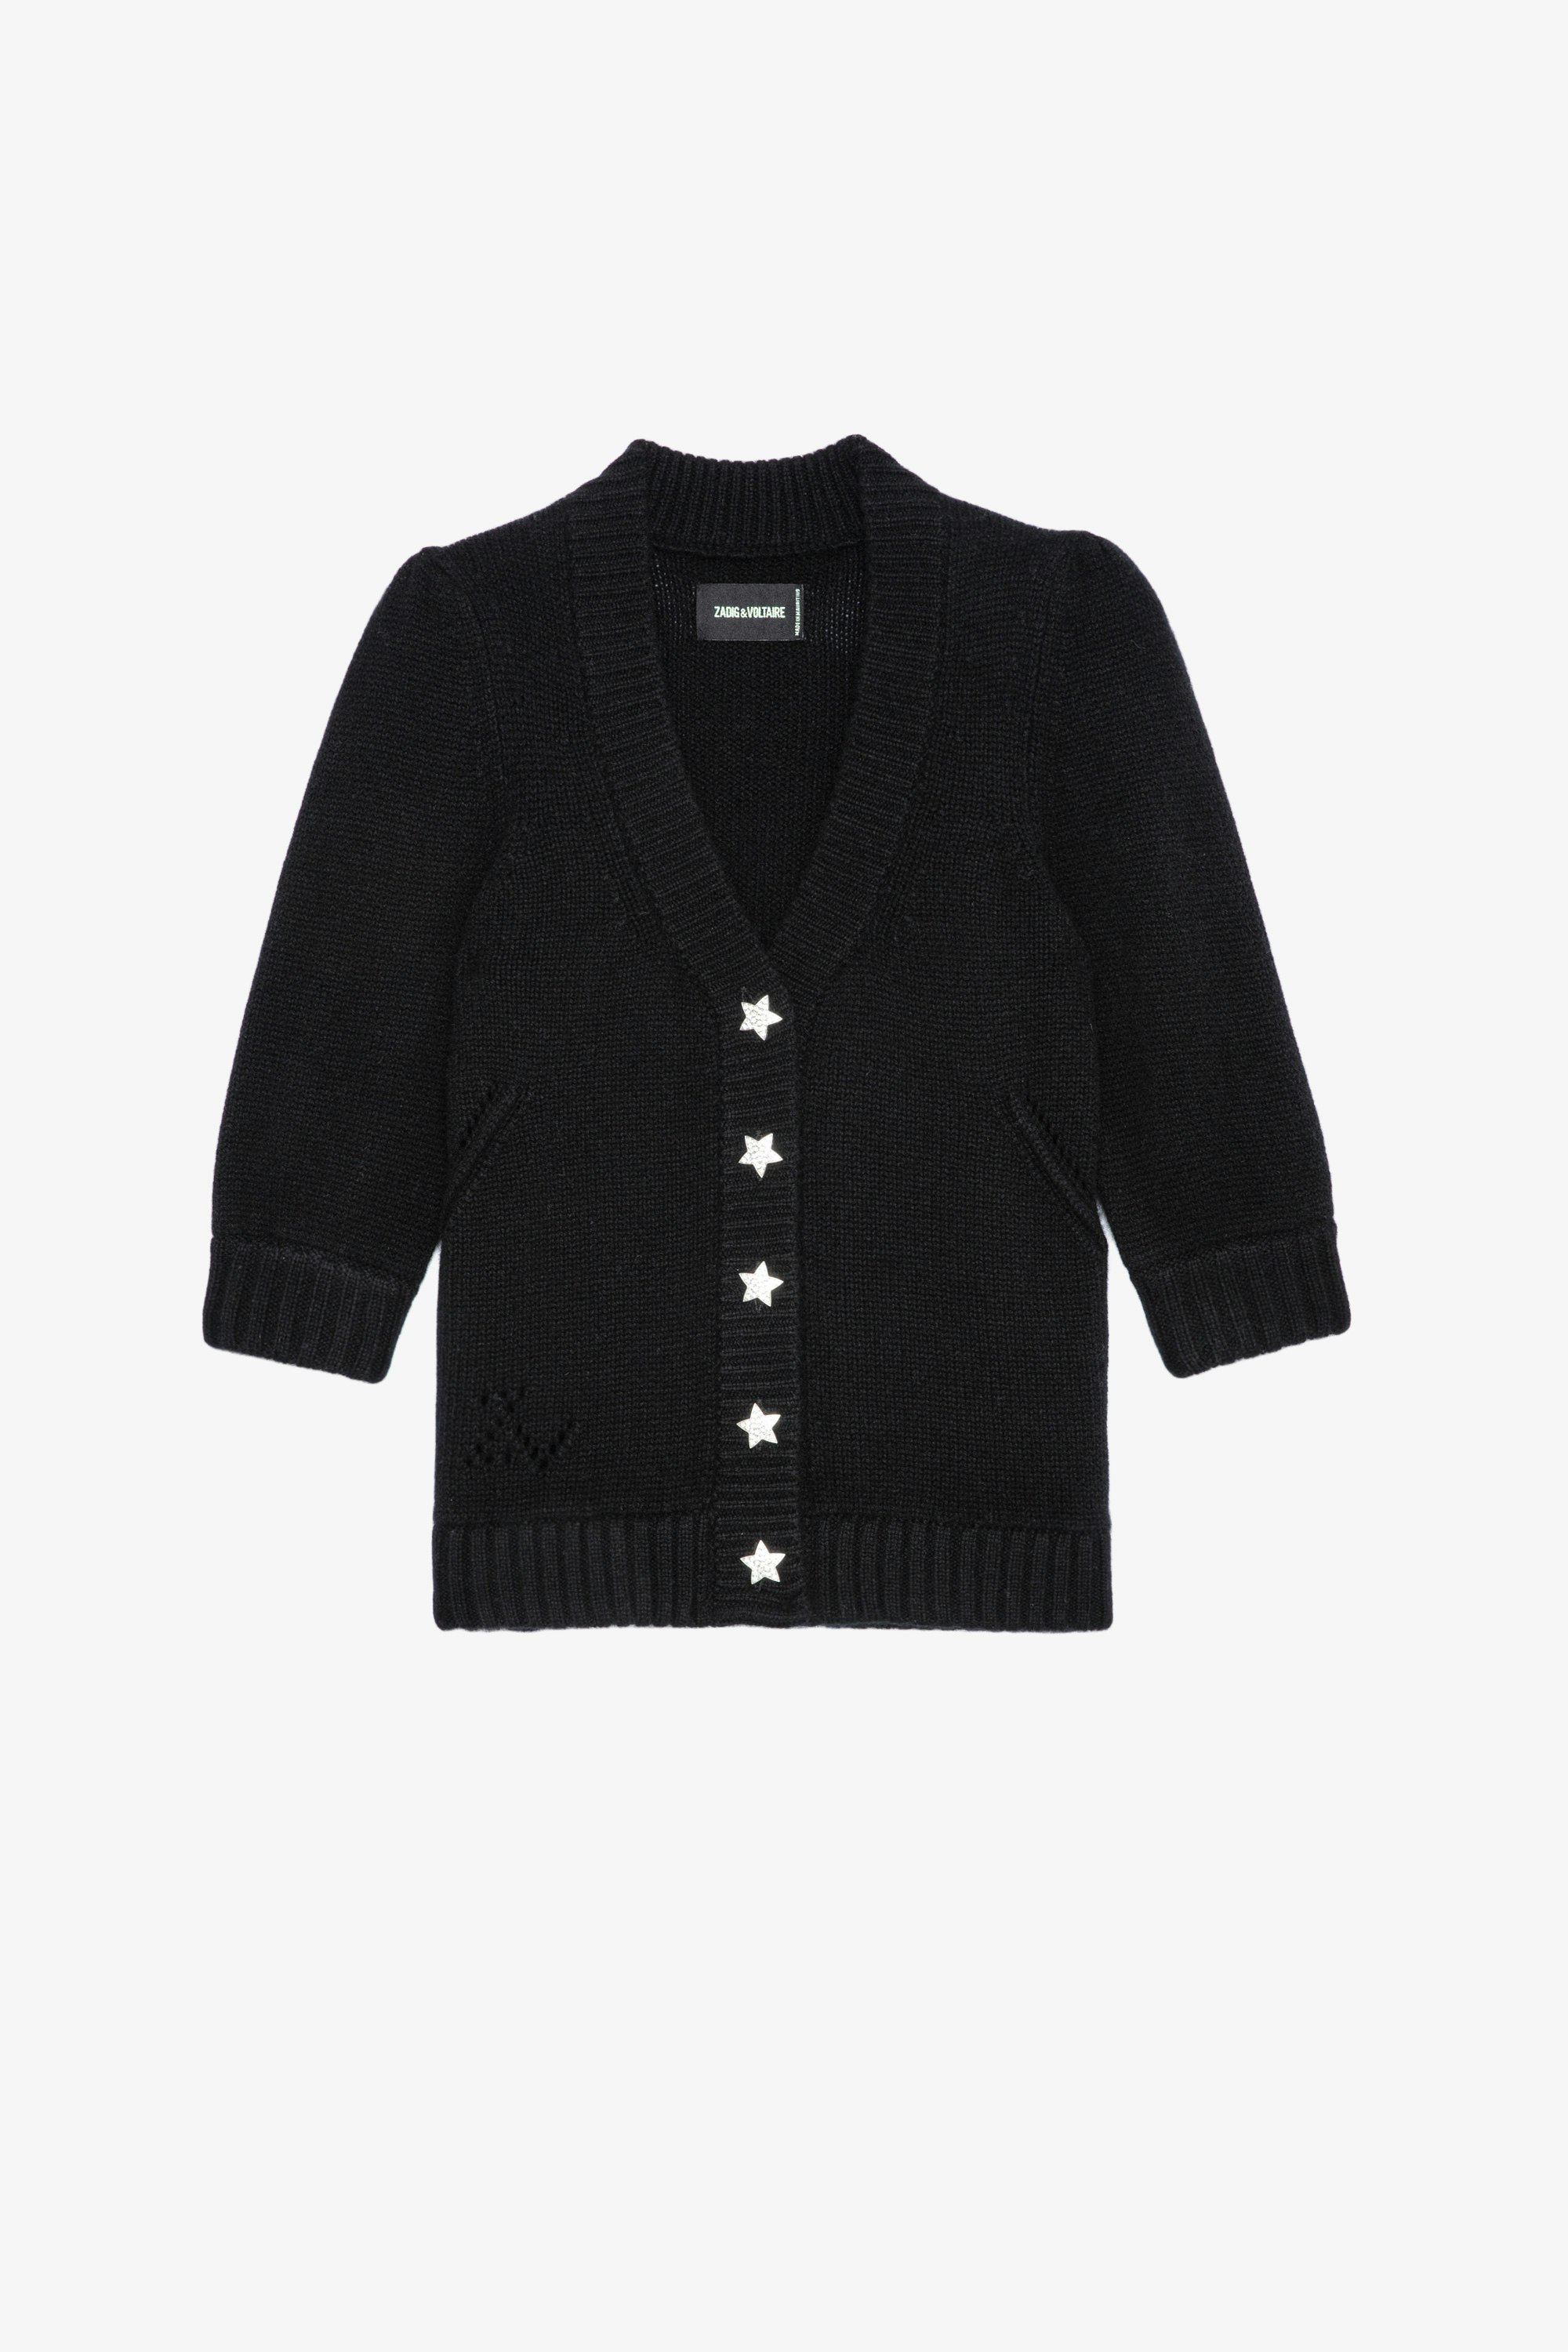 Betsy Cashmere Cardigan Women’s black cashmere cardigan with full sleeves